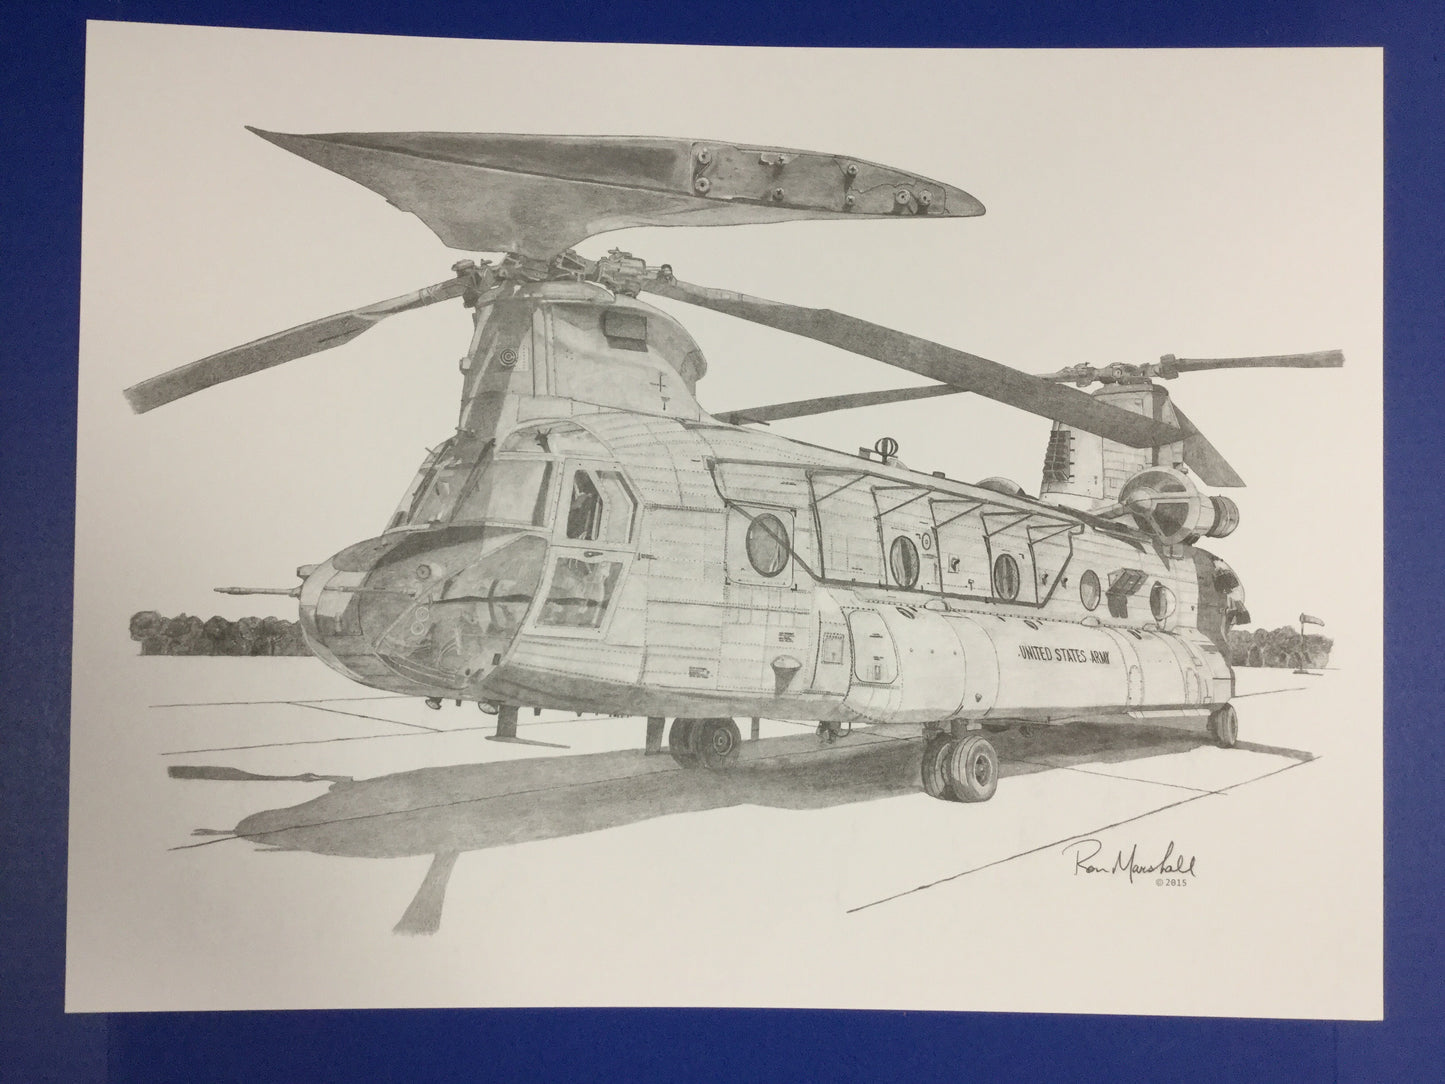 helicopter sketch. | Space drawings, Art parody, Art sketches